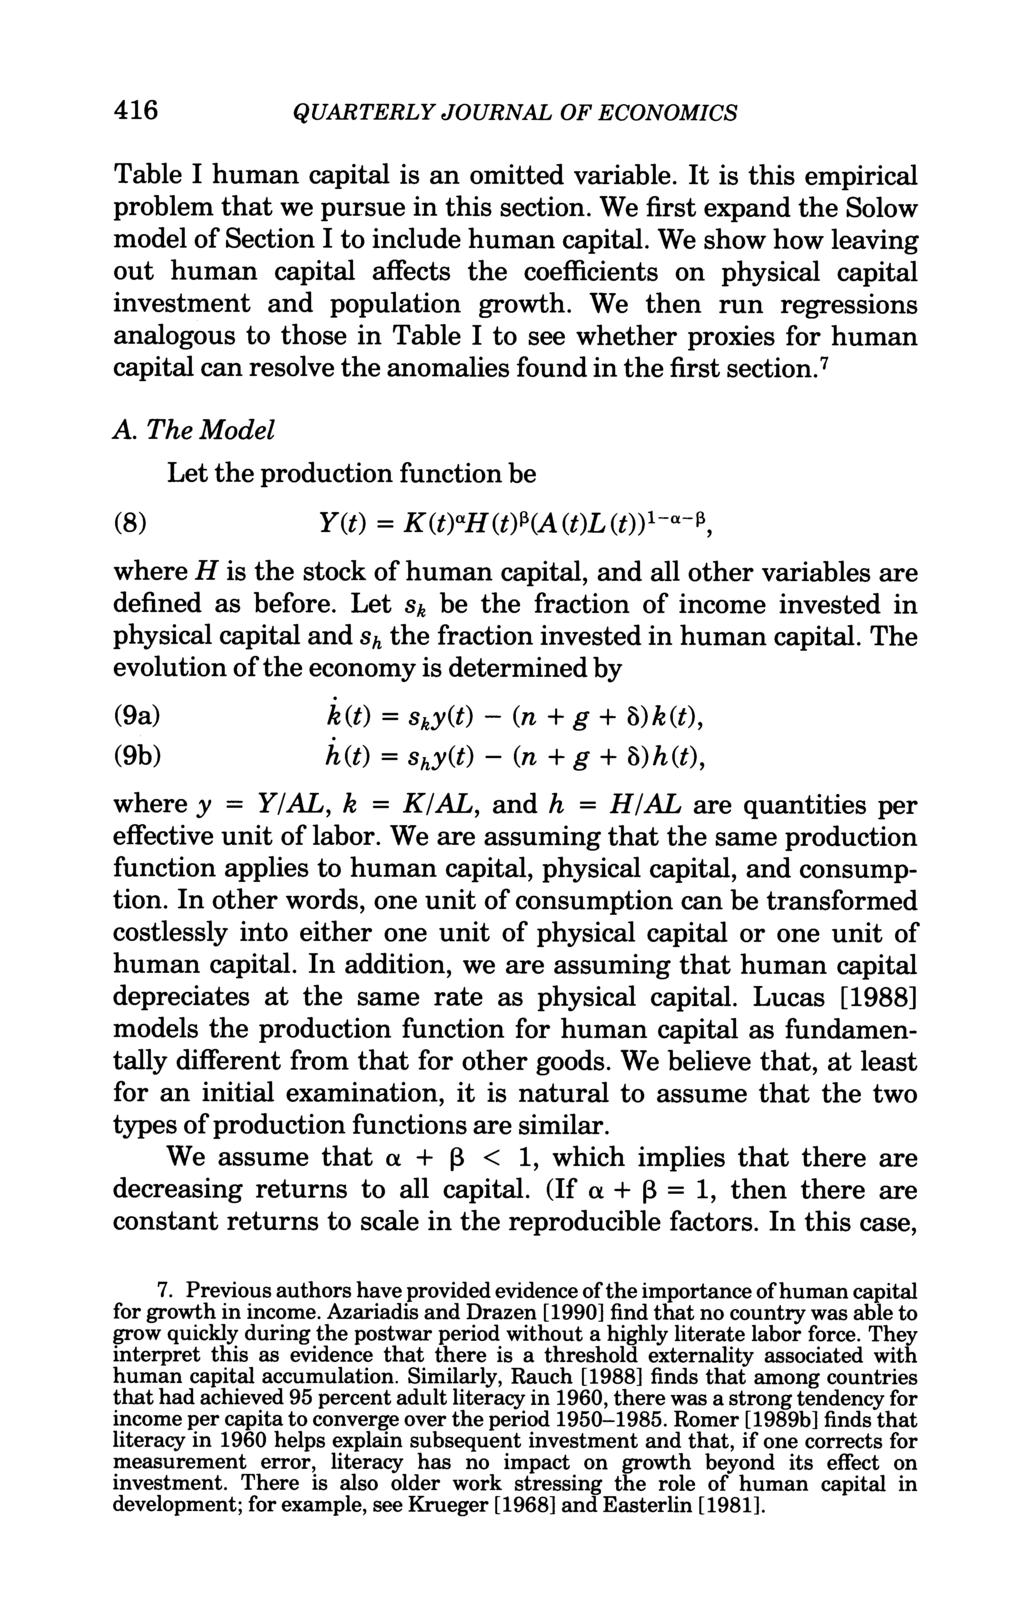 416 QUARTERLY JOURNAL OF ECONOMICS Table I human capital is an omitted variable. It is this empirical problem that we pursue in this section.